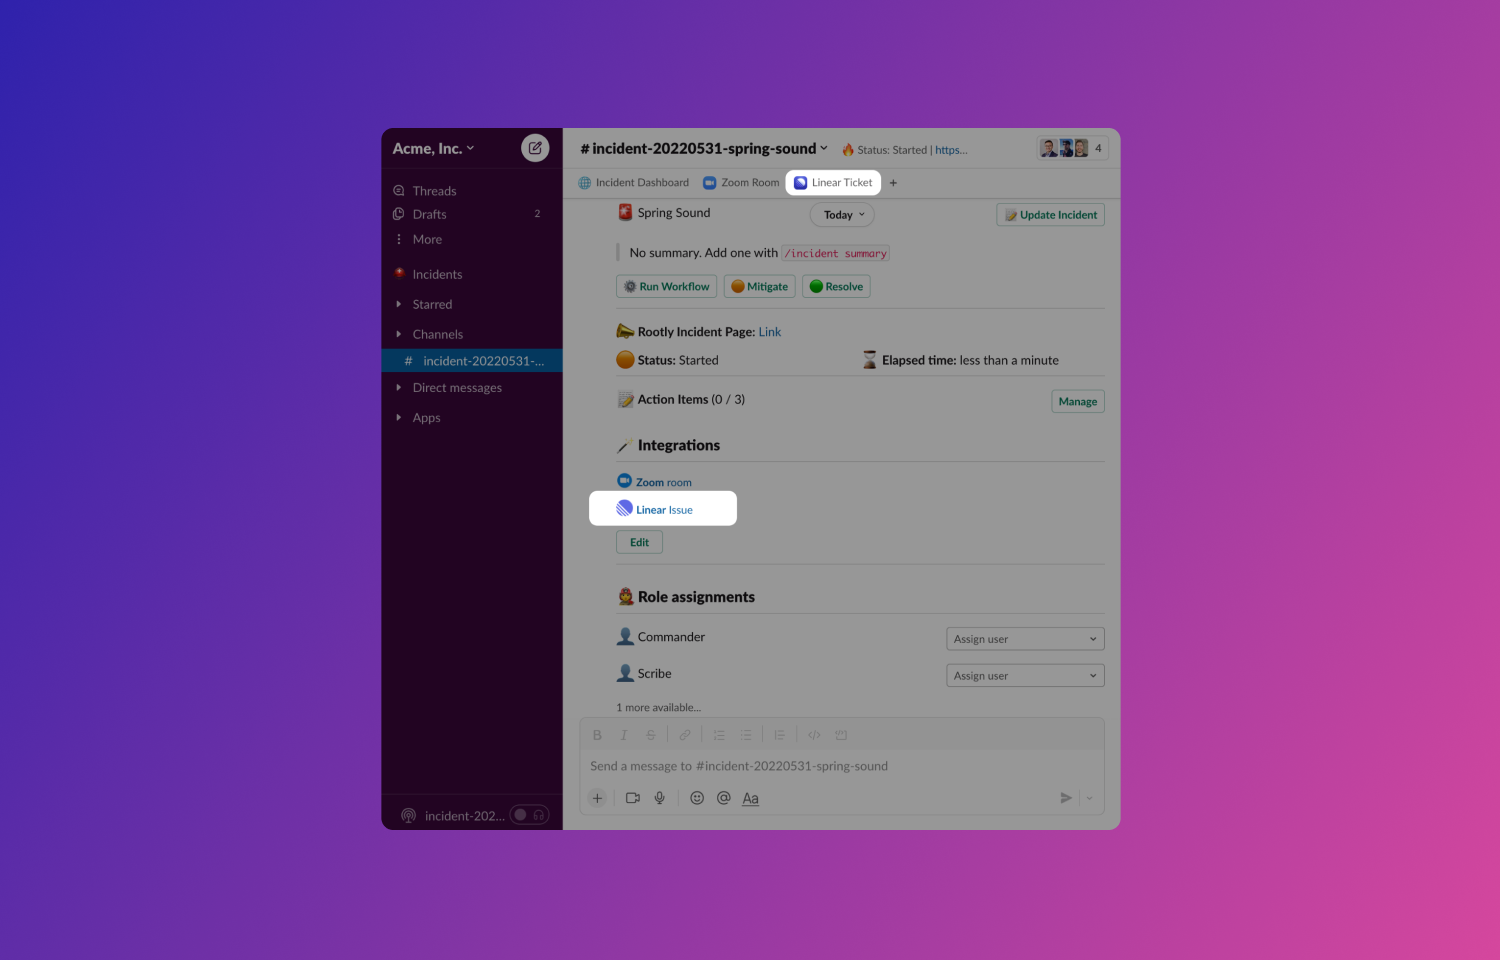 A screenshot of Slack with a linked Linear issue inside of an incident channel.